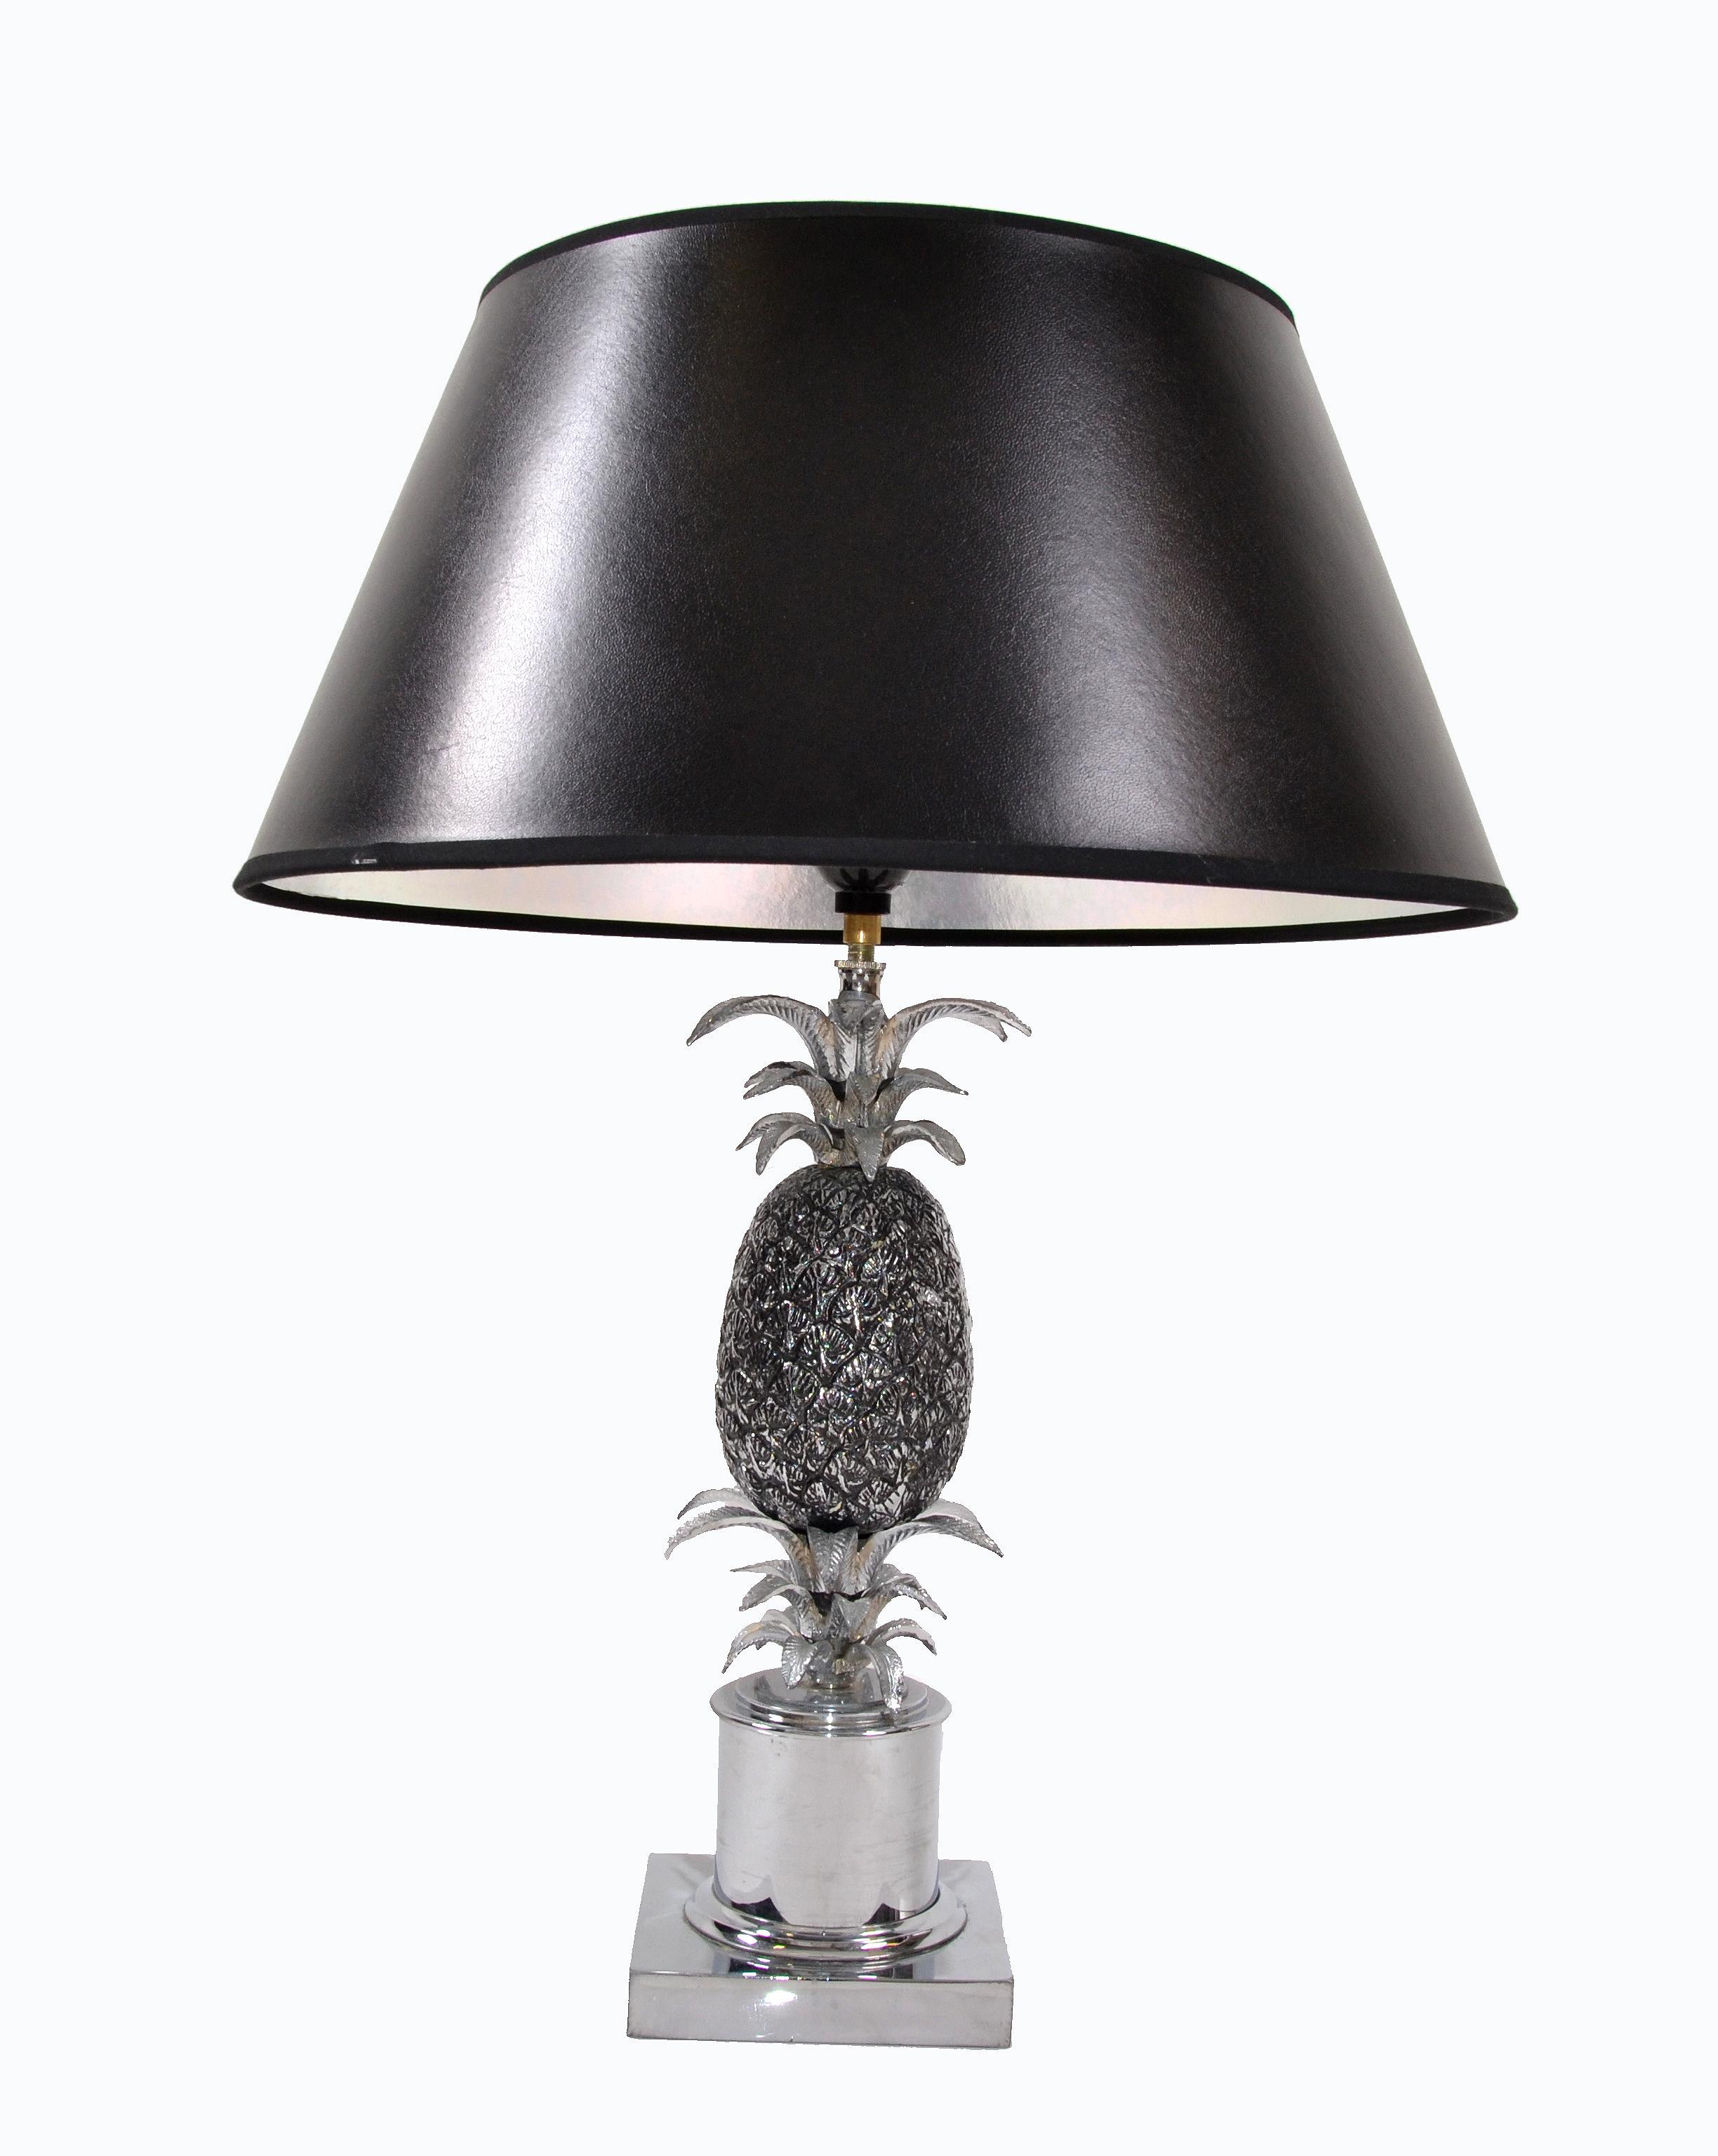 20th Century Maison Charles Chrome and Nickel Pineapple Table Lamp French Provincial 1960s For Sale